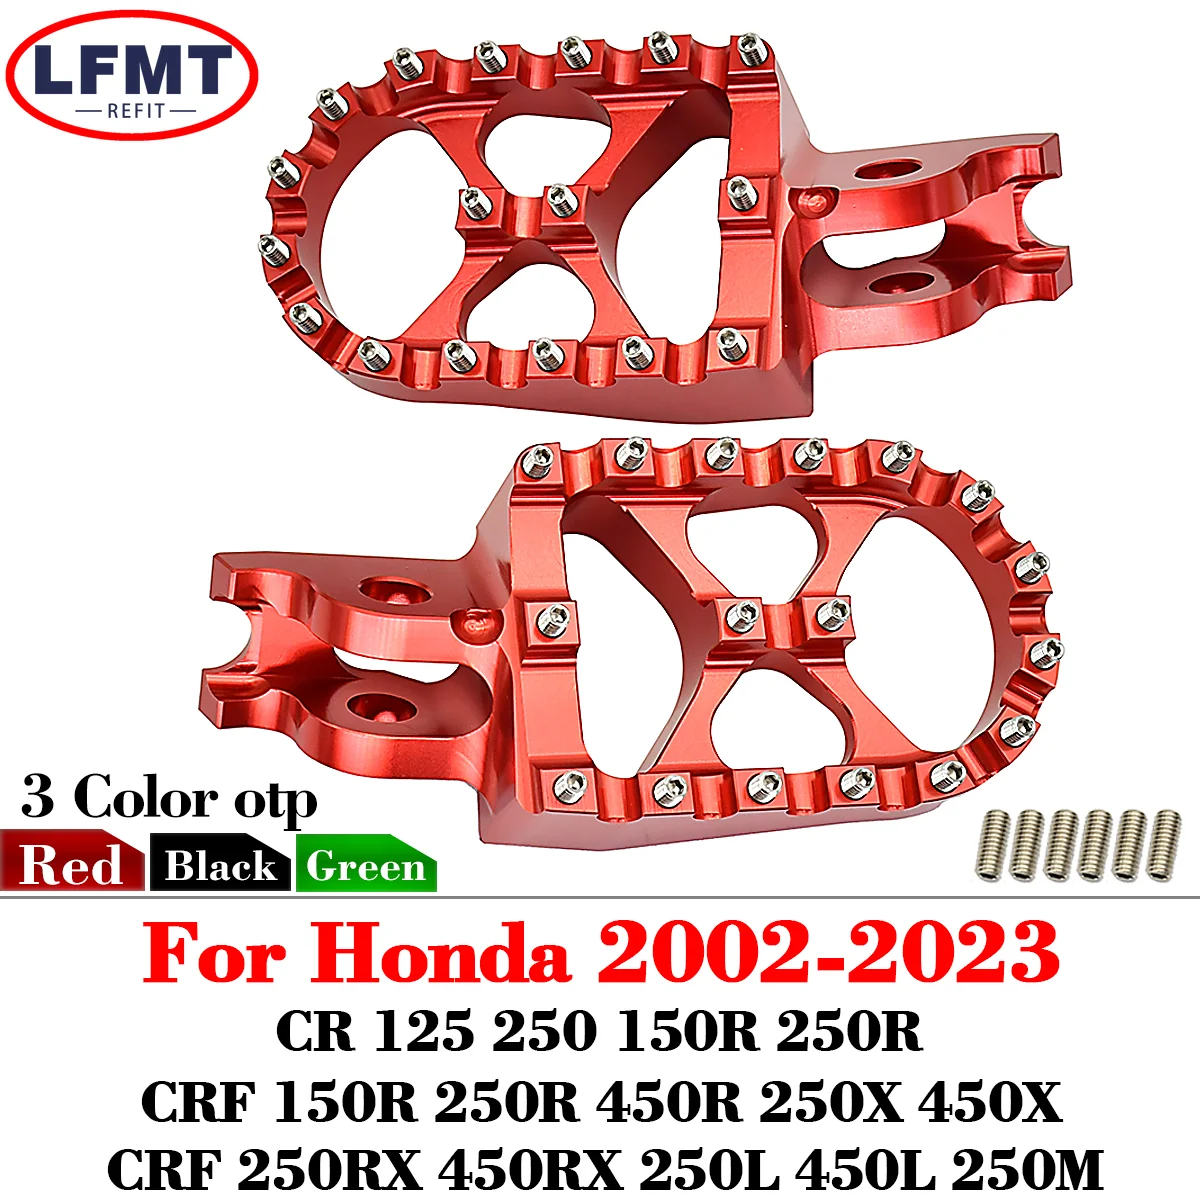 Motorcycle CNC FootRest Footpegs Foot Pegs Pedals For HONDA CRF 150R 250R 450R - £30.37 GBP